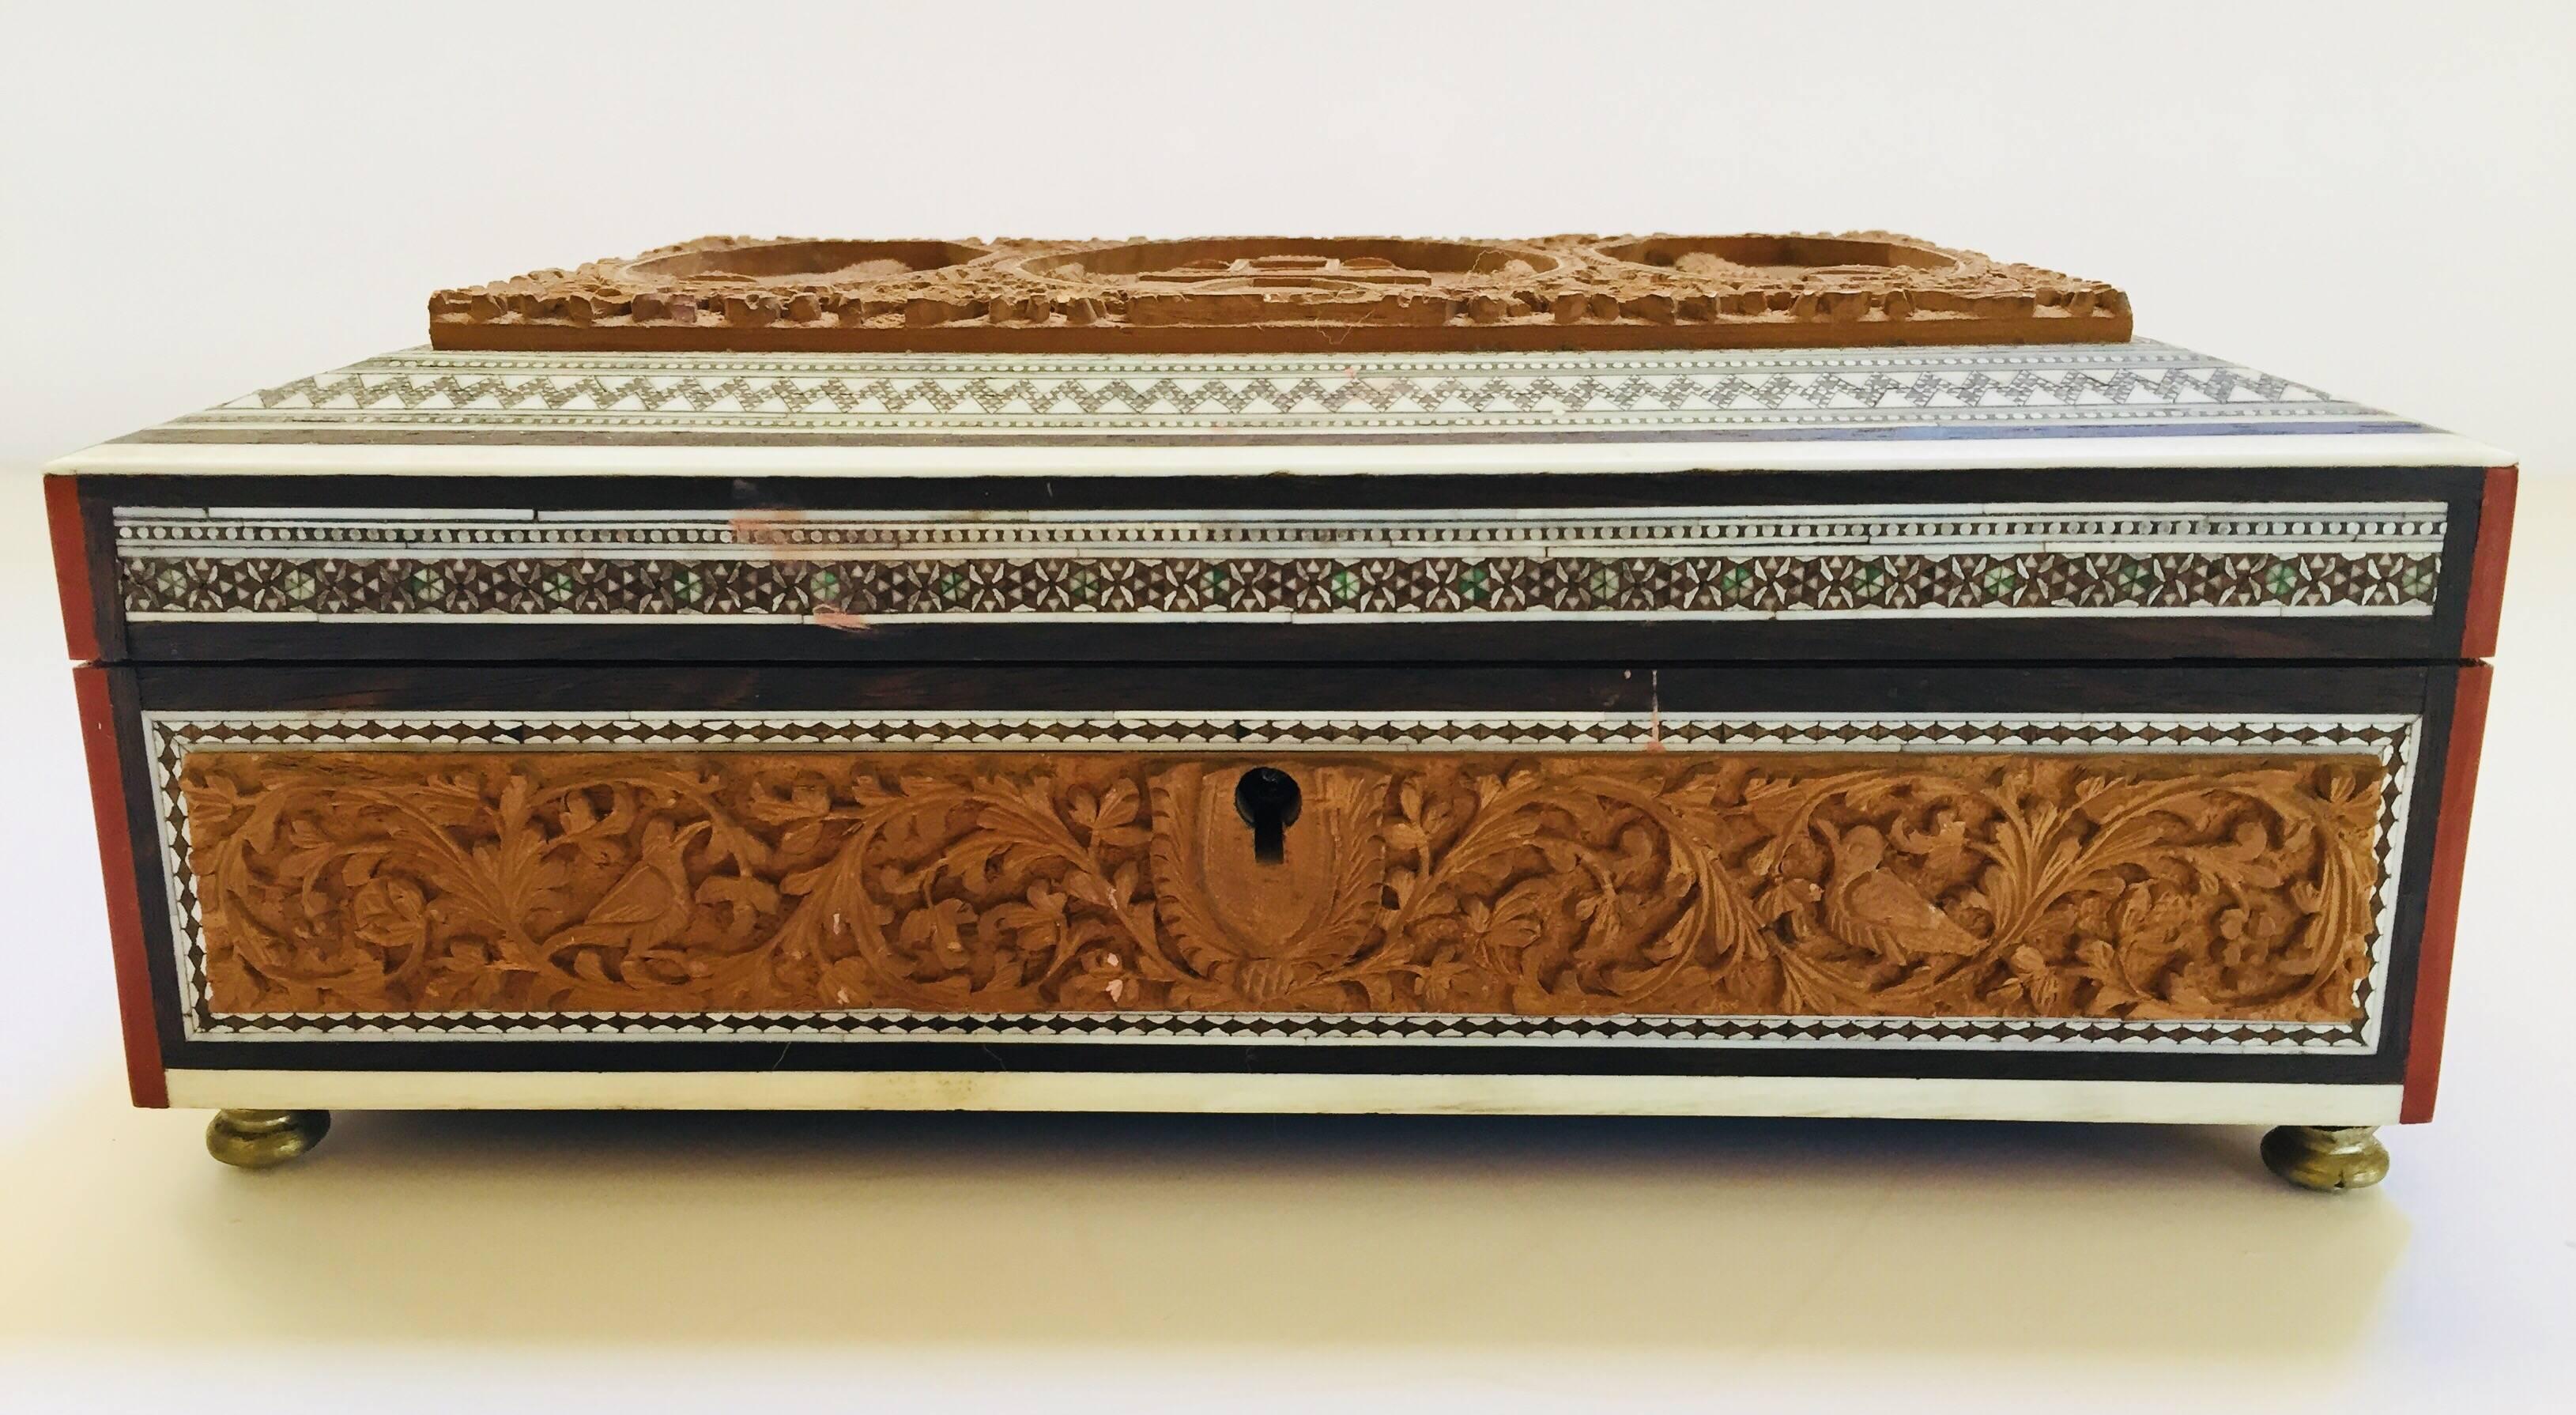 19th century Anglo-Indian sandal wood box, Sadeli mosaic box fitted with various compartments finely hand-carved with the Taj Mahal.
Of sarcophagus form with carved and inlaid decoration, the interior with a compartmentalized and lidded tray.
The